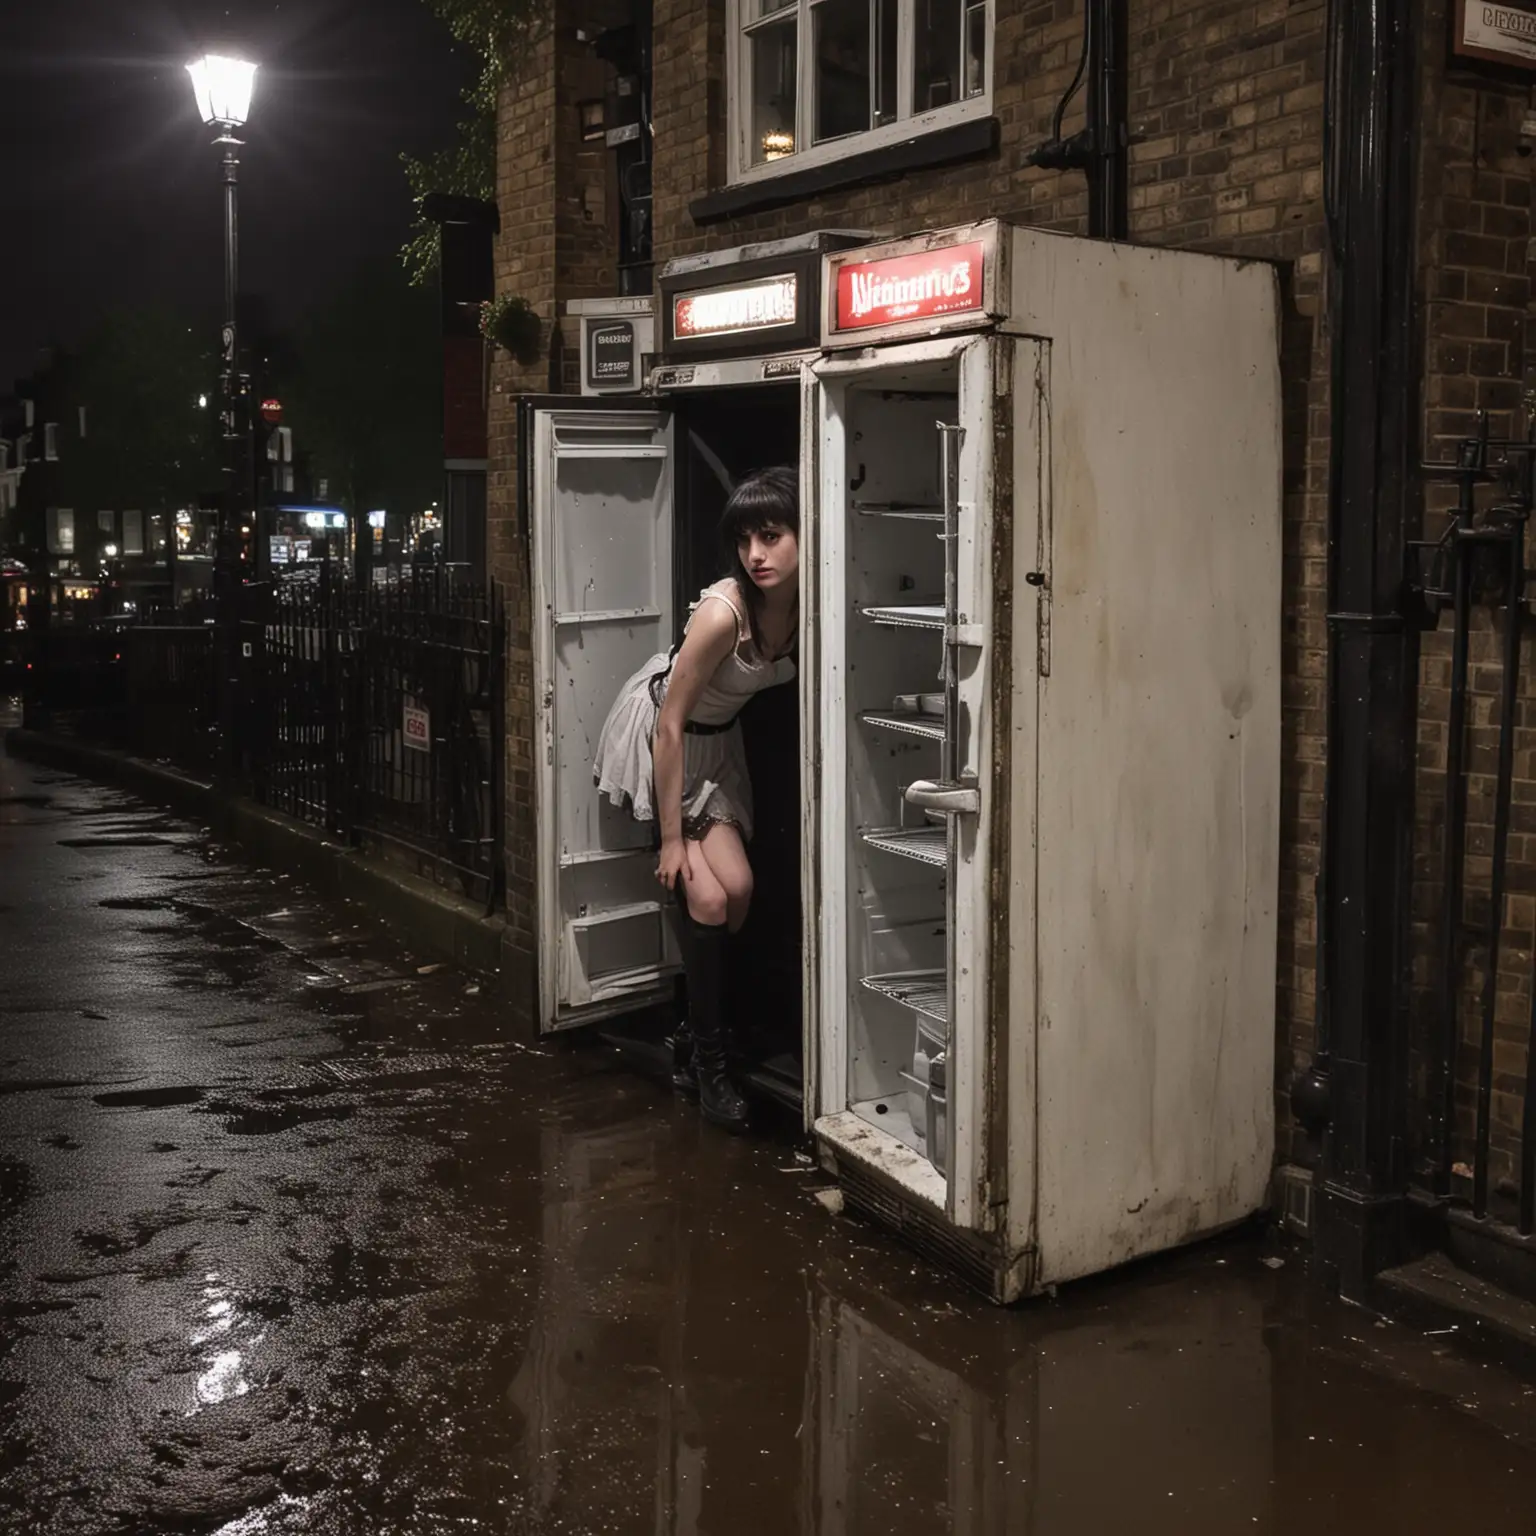 old fridge on its side outside a pub in wet London at midnight with goth girl watching